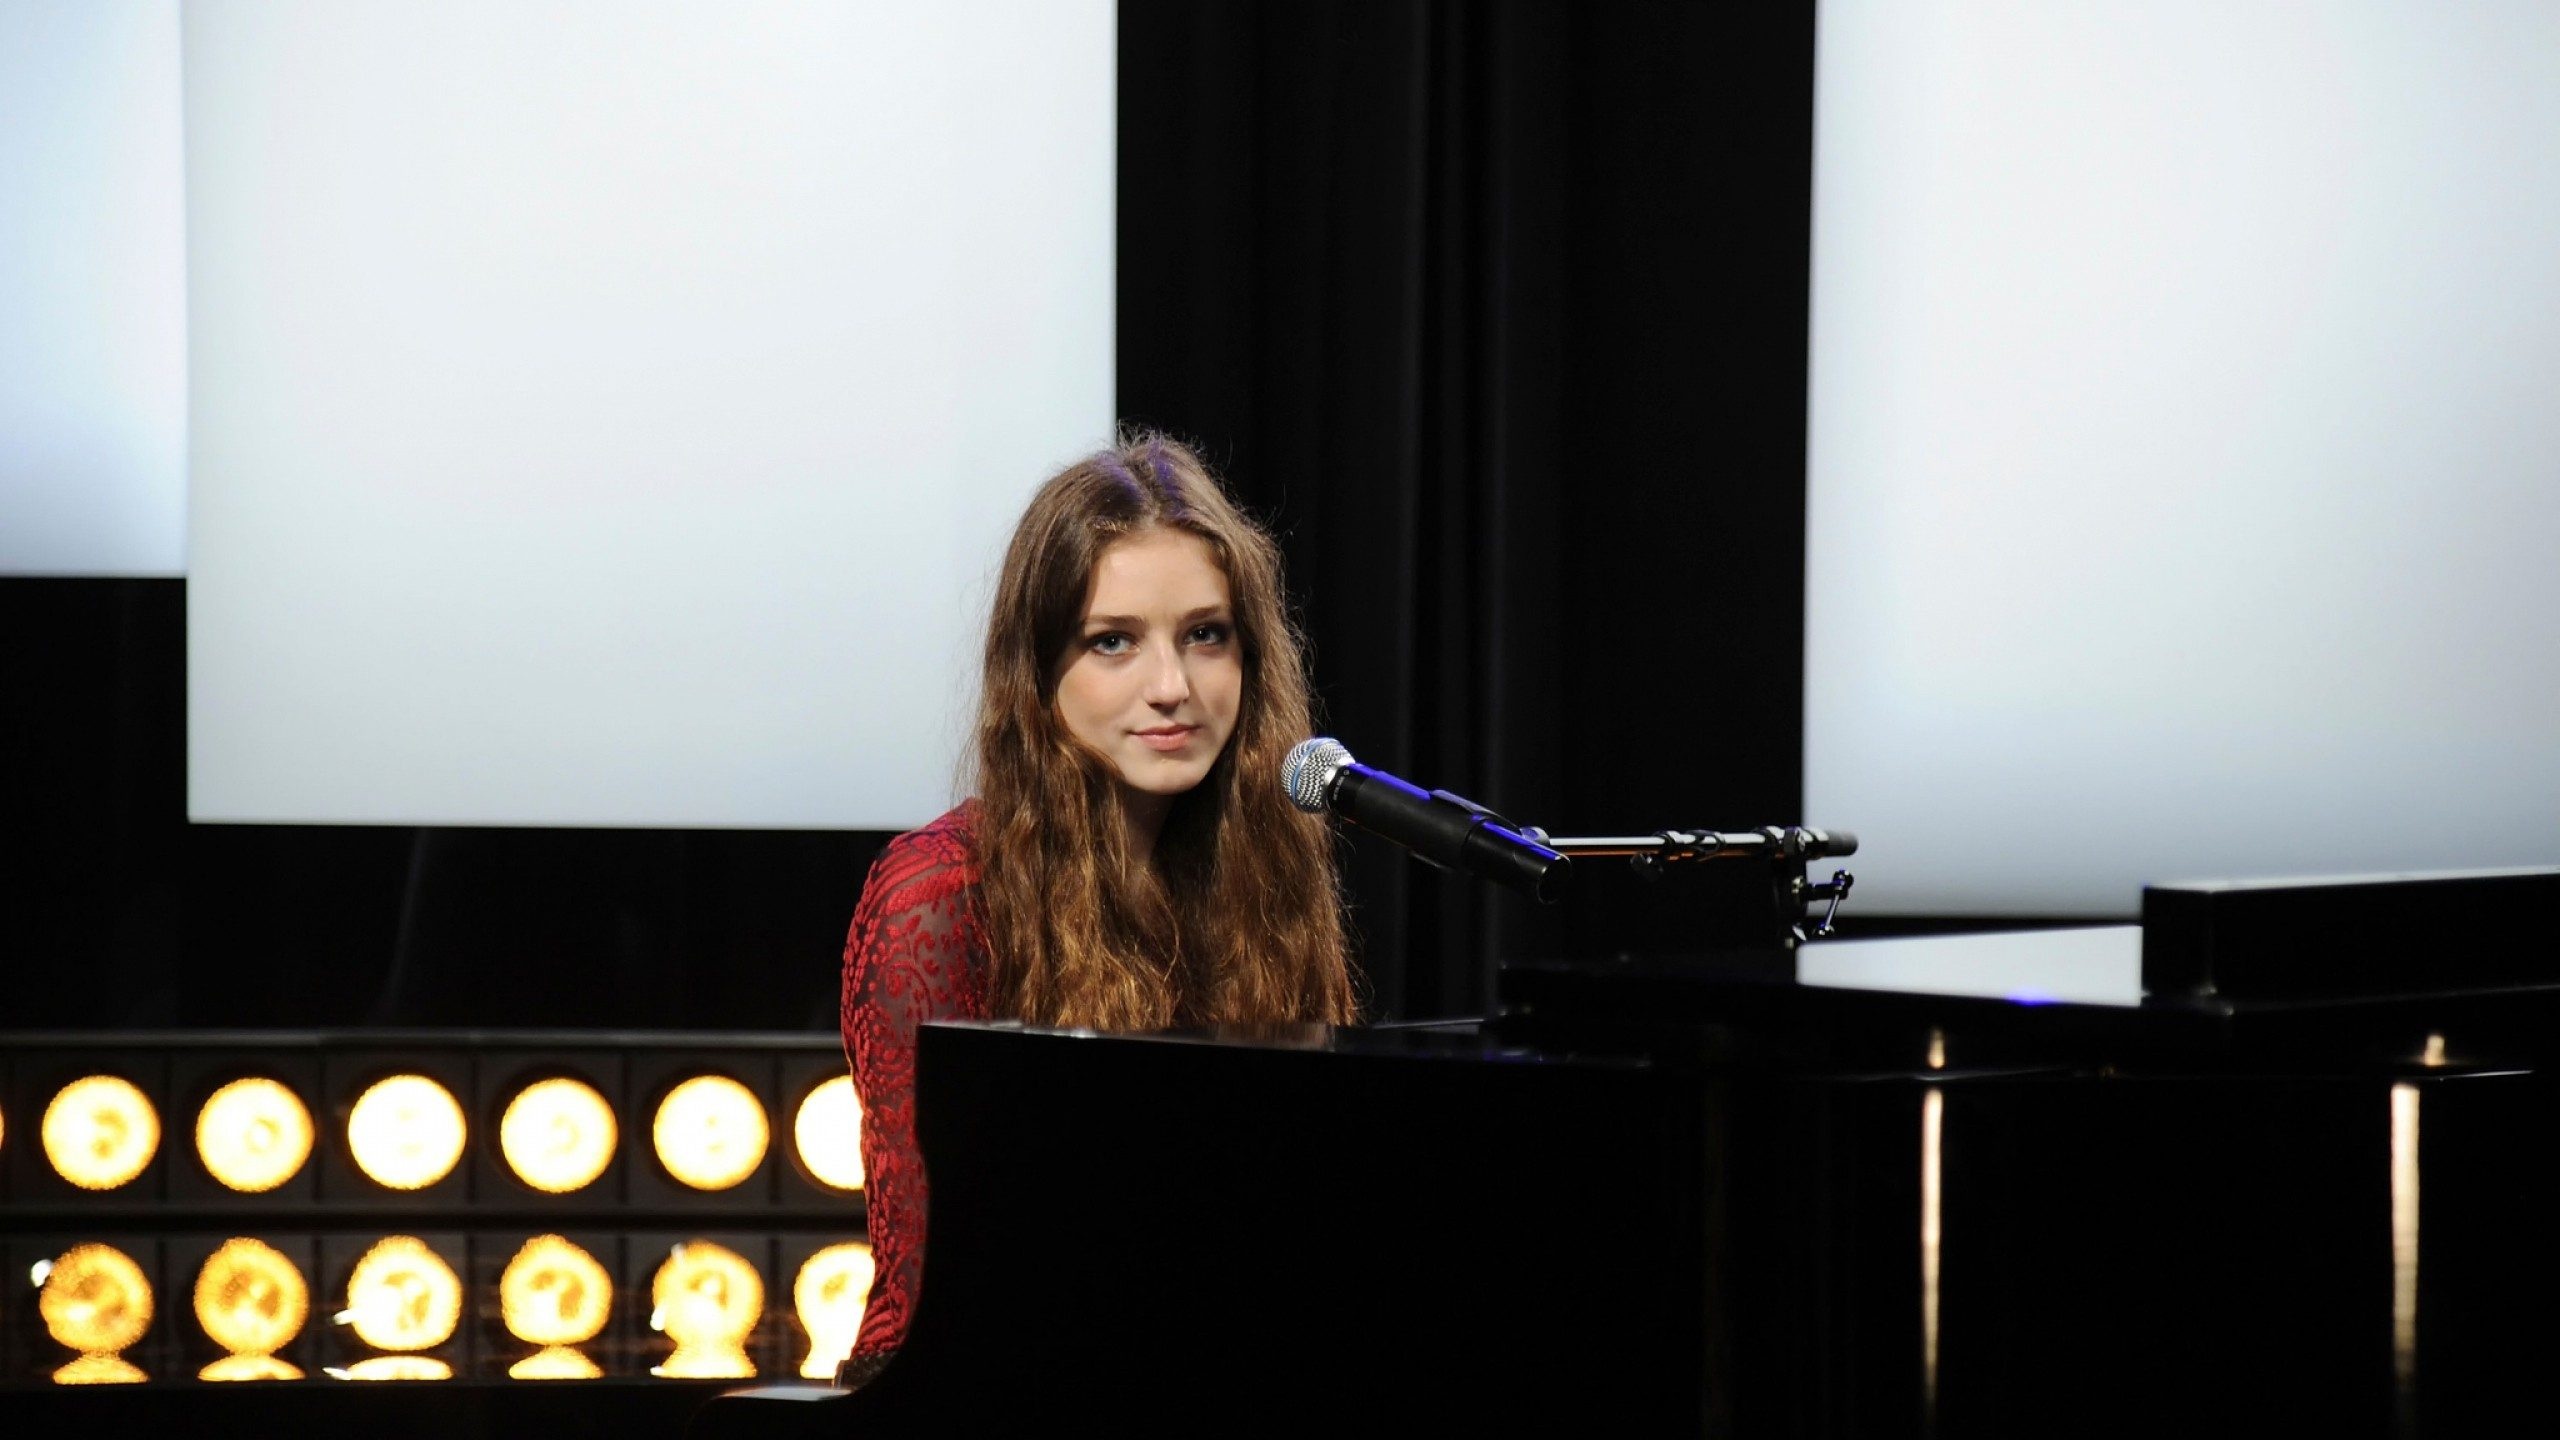 Birdy, Music wallpapers, Serene images, Visual delight, 2560x1440 HD Desktop